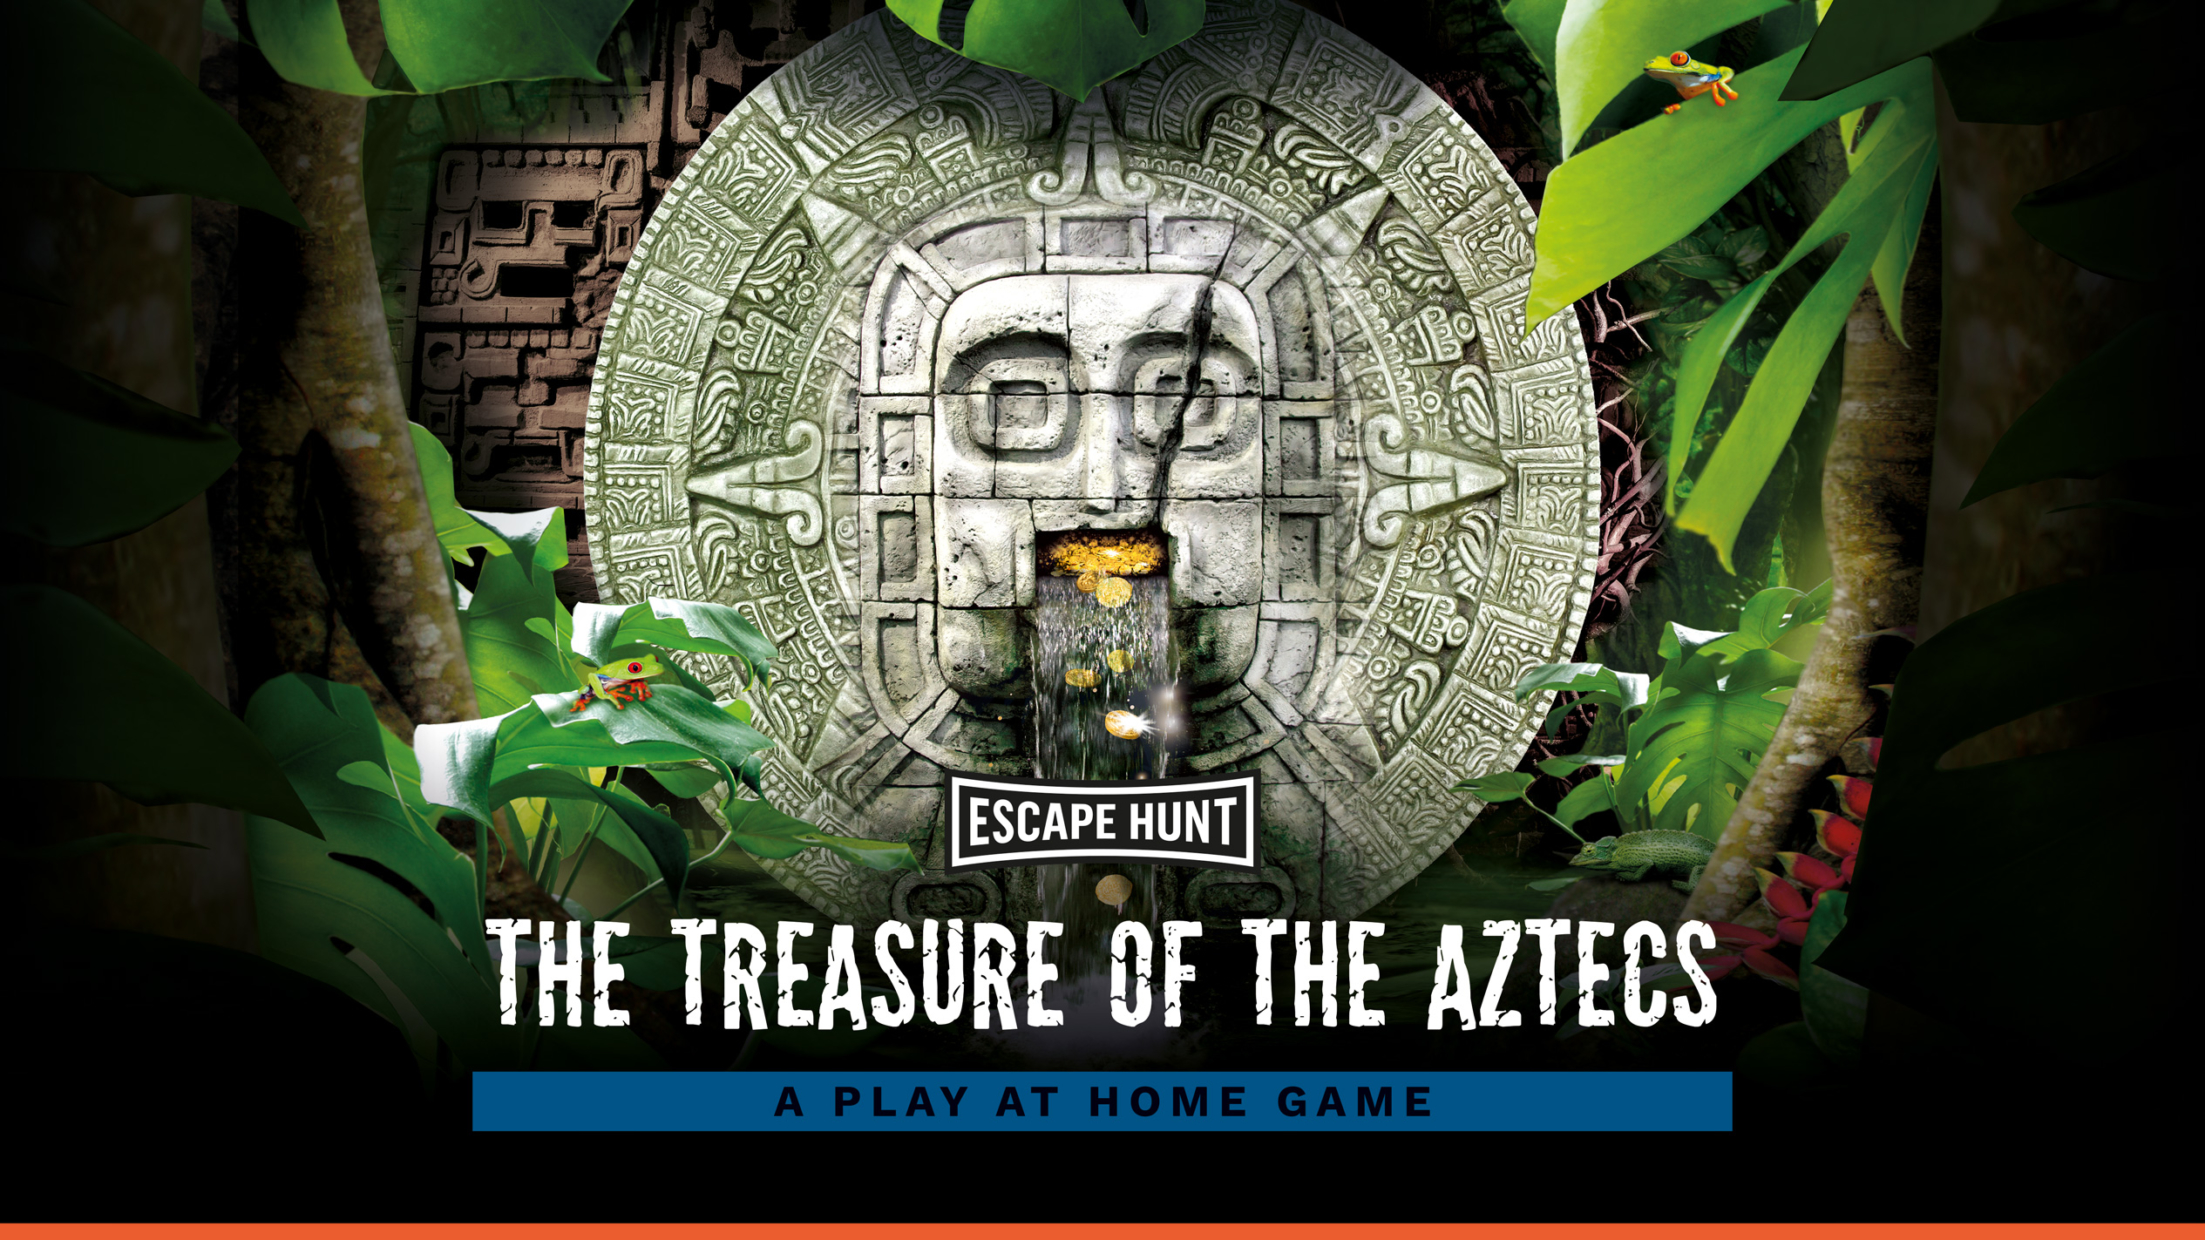 THE TREASURE OF THE AZTECS – NEW PLAY AT HOME “PRINT & PLAY” GAME!